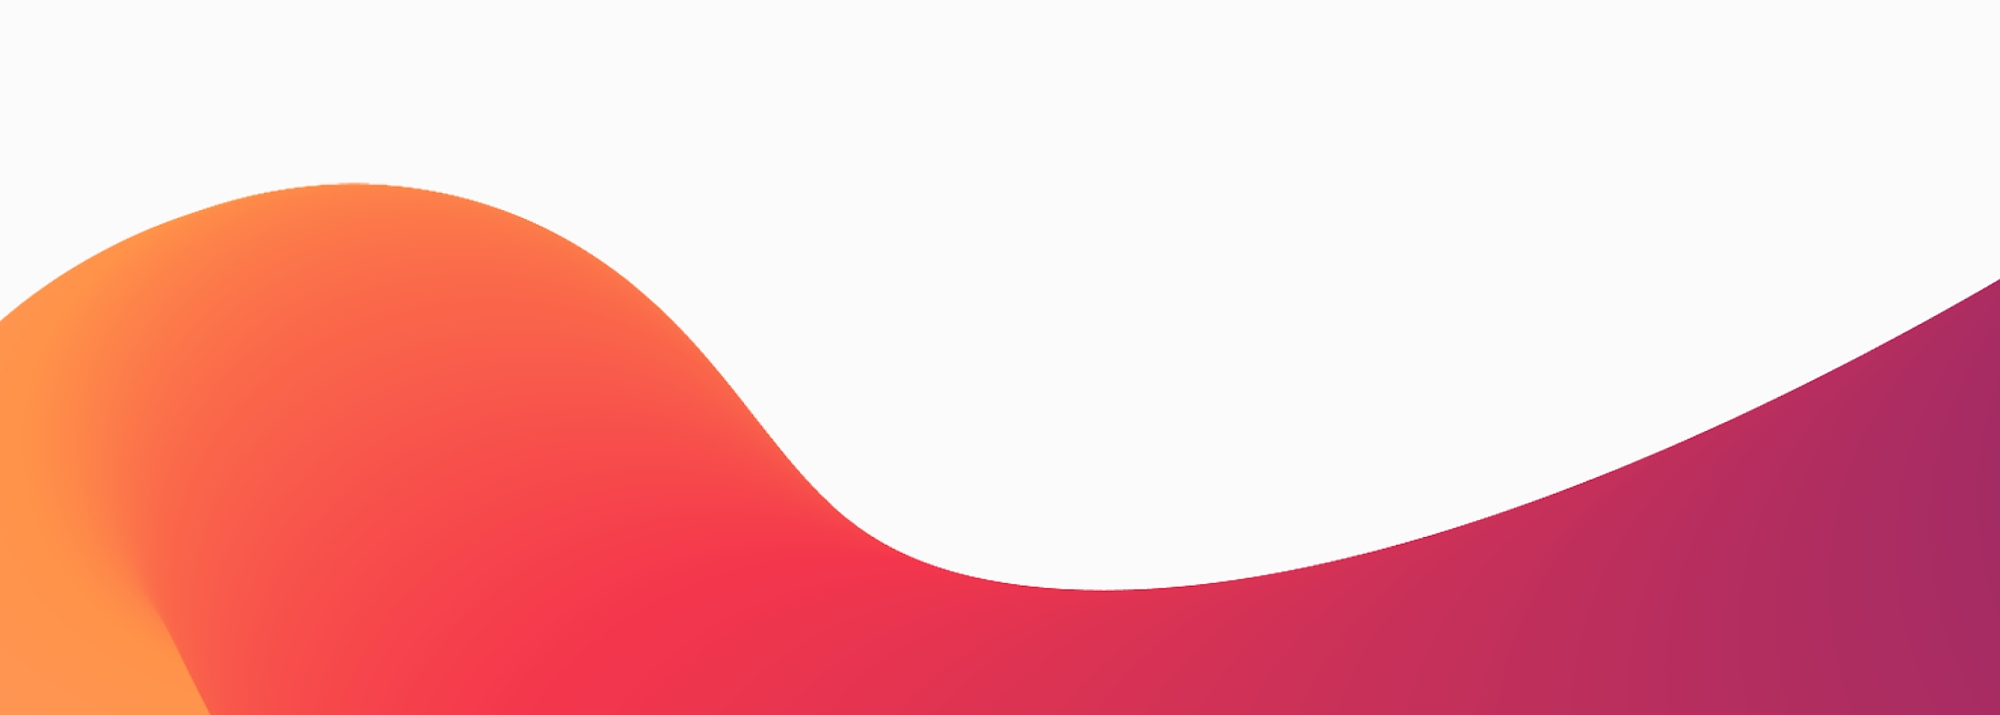 An abstract design featuring a smooth gradient wave with colors transitioning from orange to red to purple 